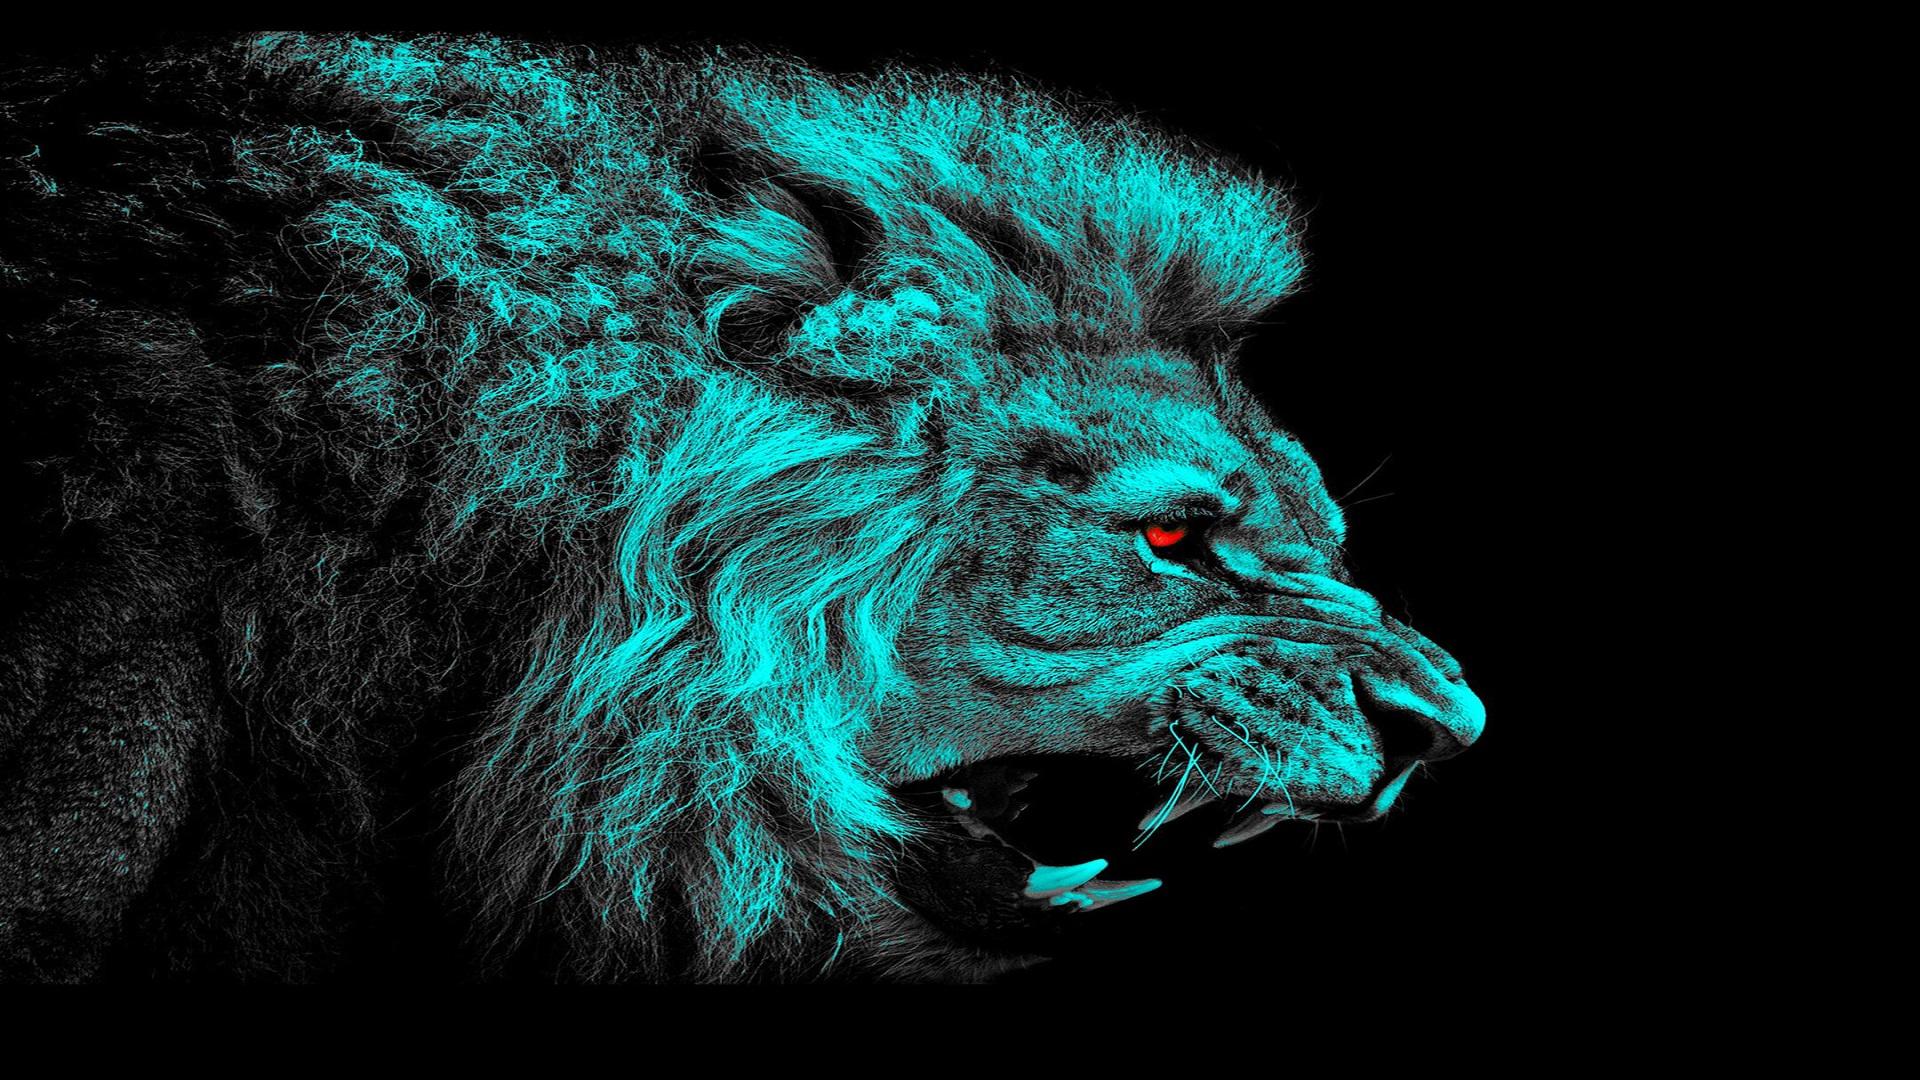 Angry Lion Wallpapers